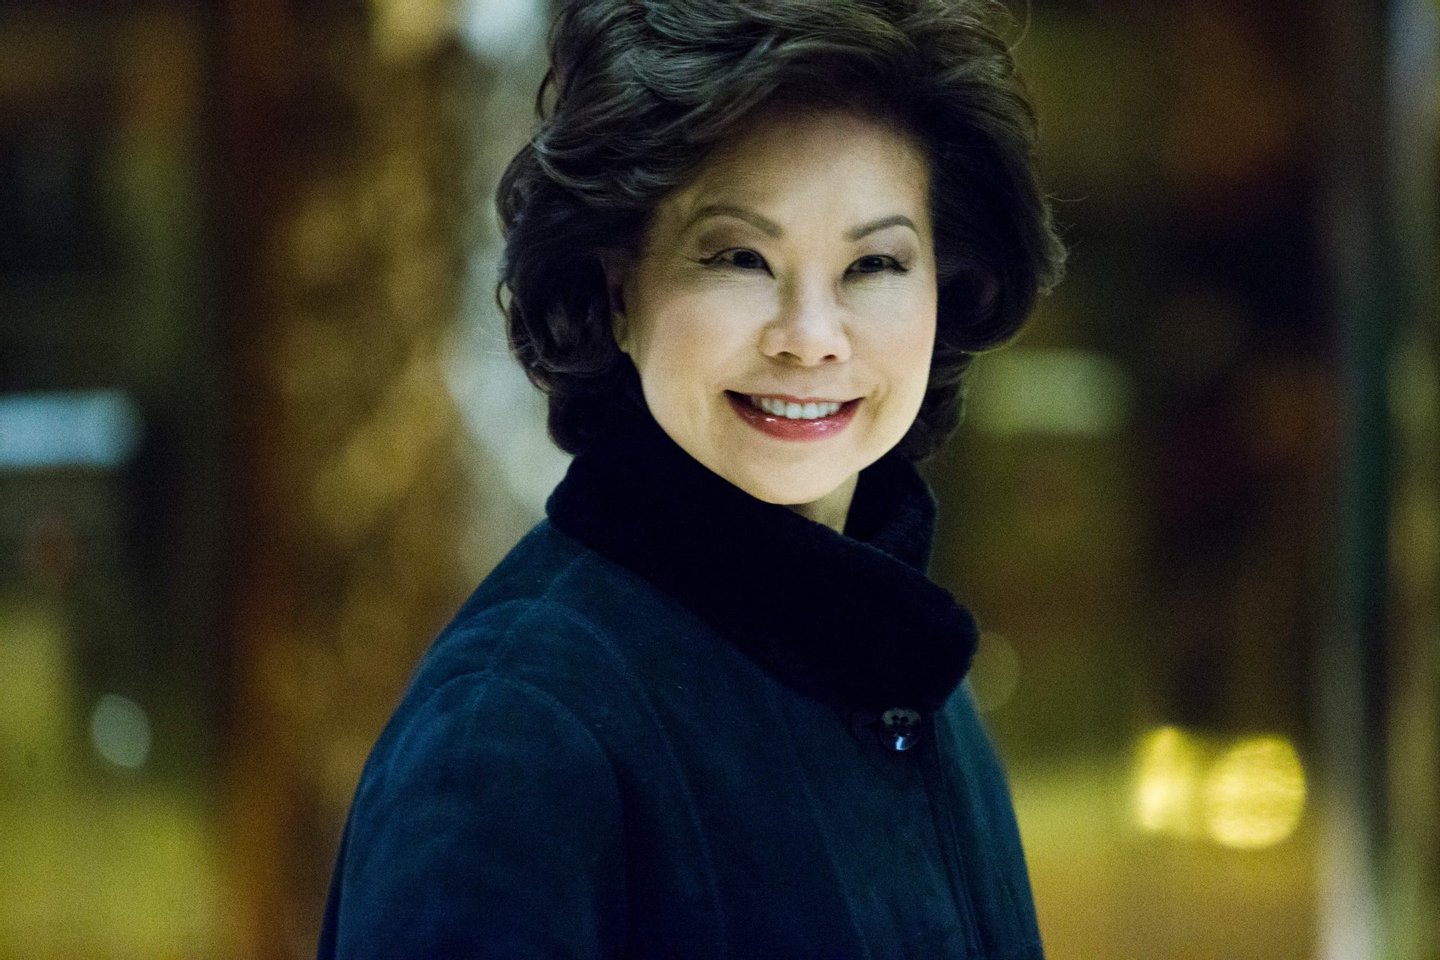 Former US Secretary of Labor Elaine Chao arrives at Trump Tower on another day of meetings scheduled with President-elect Donald Trump on November 21, 2016 in New York. / AFP / Eduardo Munoz Alvarez (Photo credit should read EDUARDO MUNOZ ALVAREZ/AFP/Getty Images)